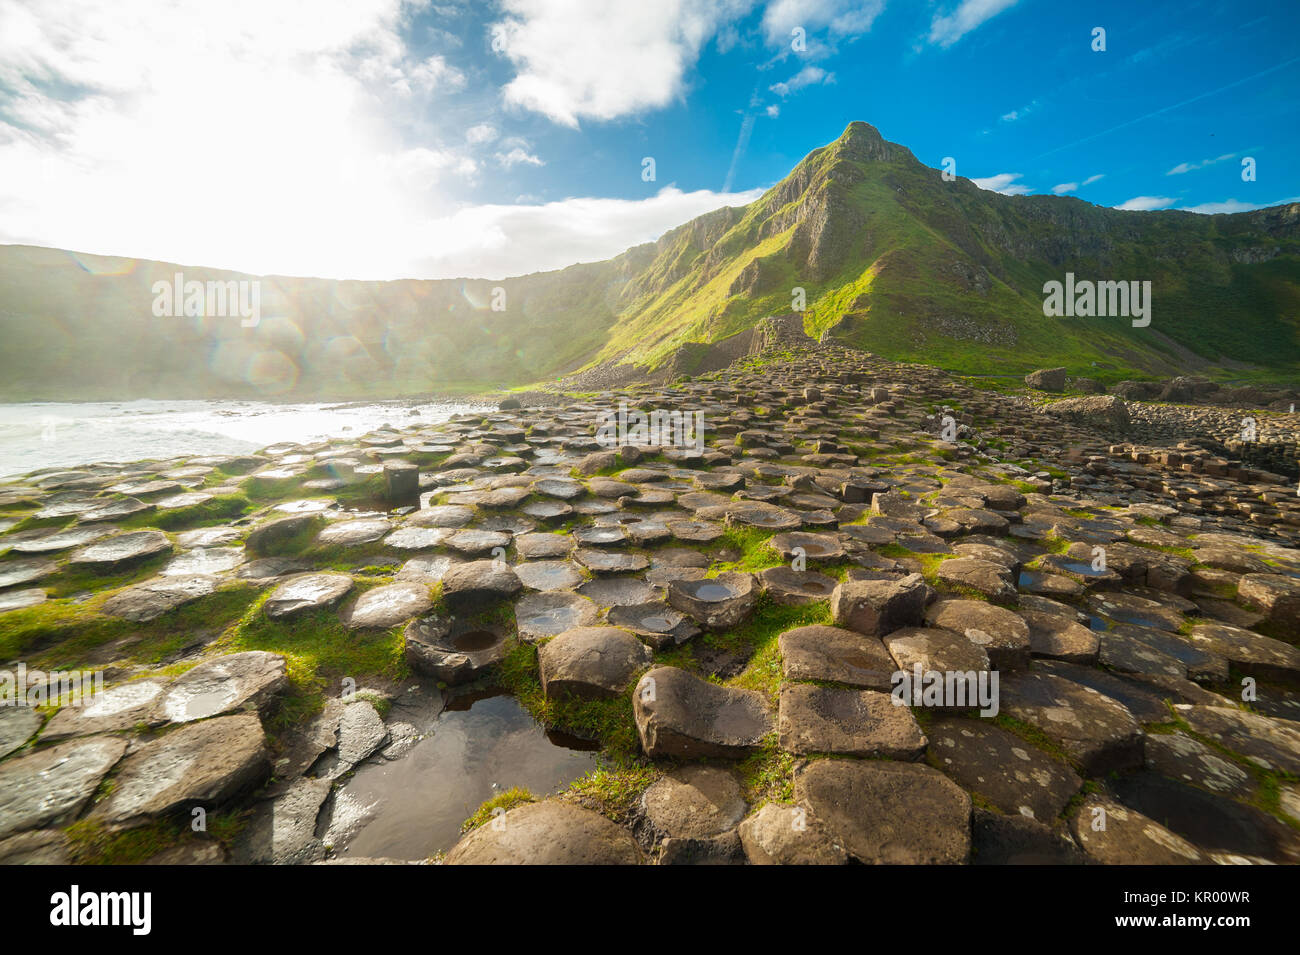 The Giant's Causeway at dawn on a sunny day with the famous basalt columns, the result of an ancient volcanic eruption. County Antrim on the north coa Stock Photo